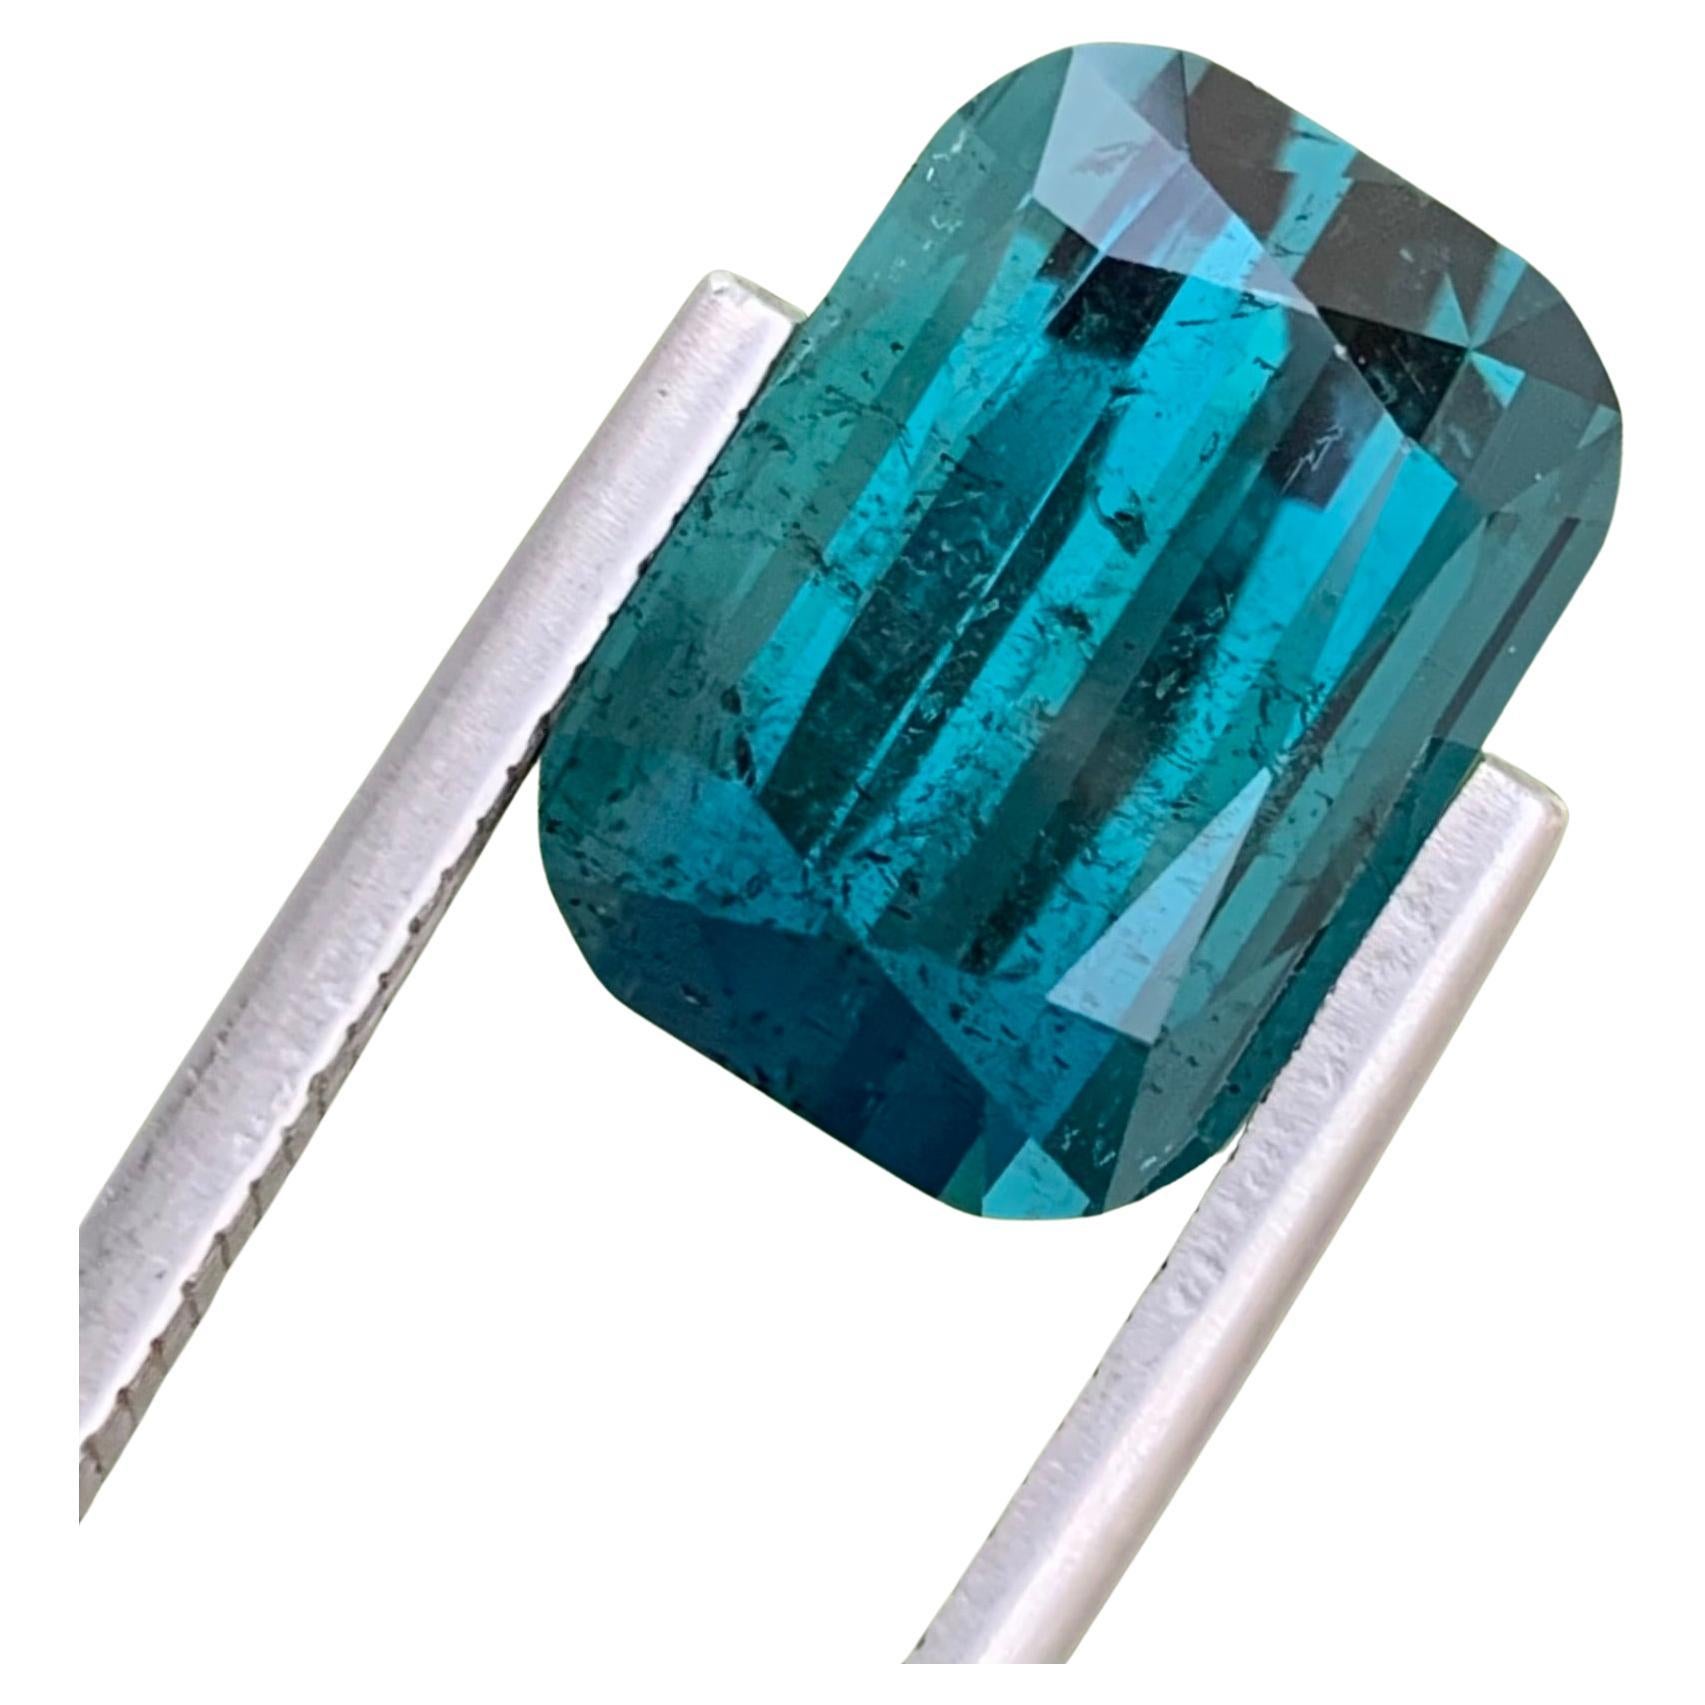 9.70 Carats Natural Loose Deep Indicolite Tourmaline Small Included Clarity 